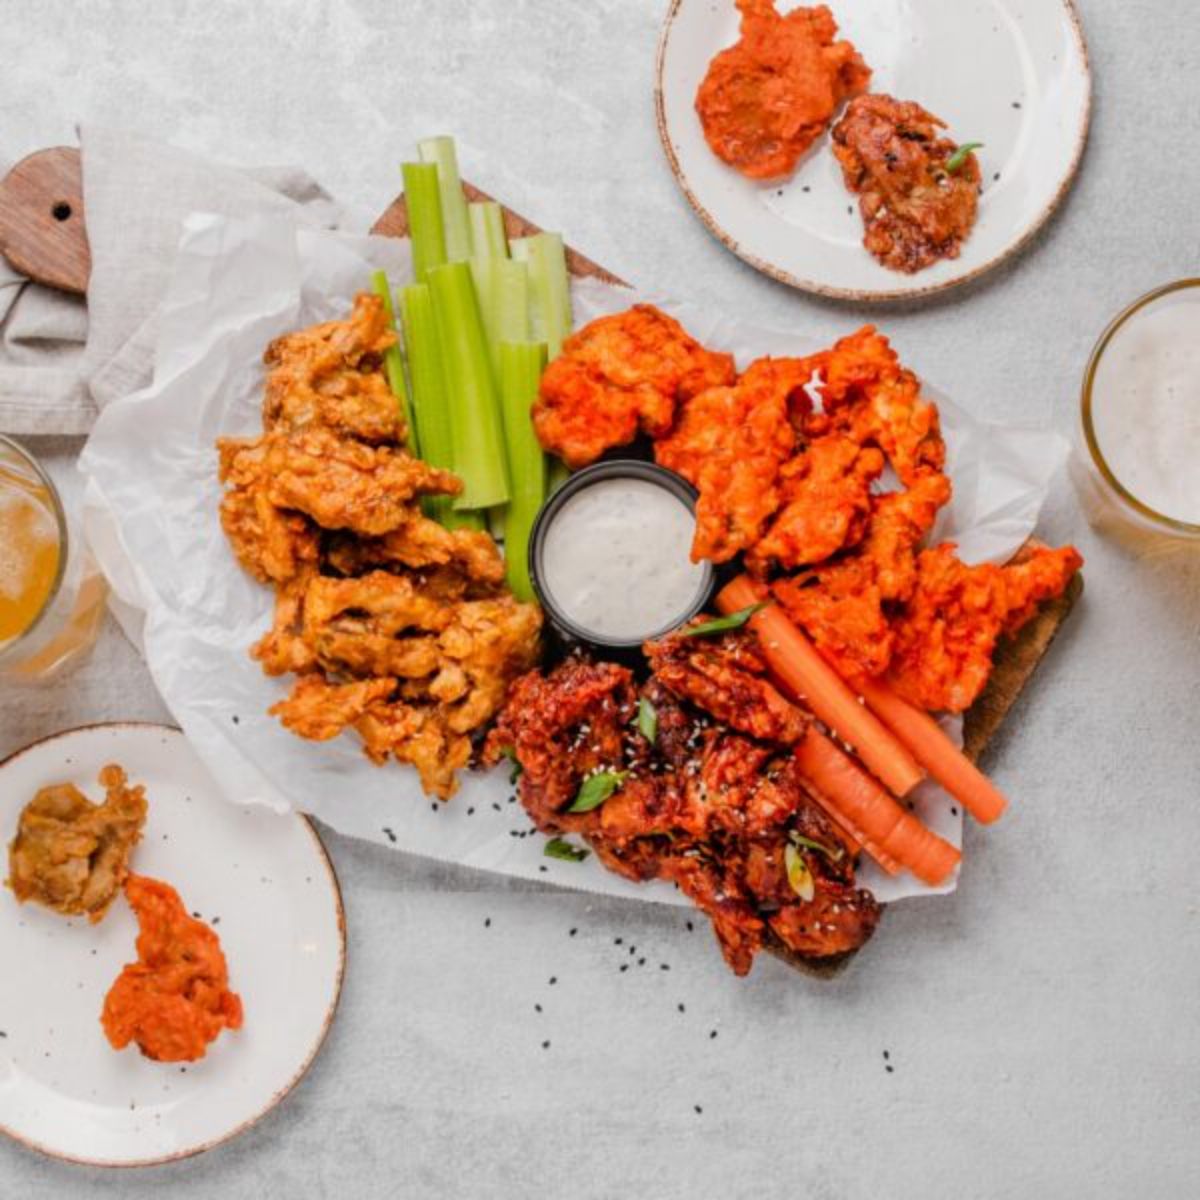 vegan mushroom wings, with celery and carrot sticks and a creamy dip